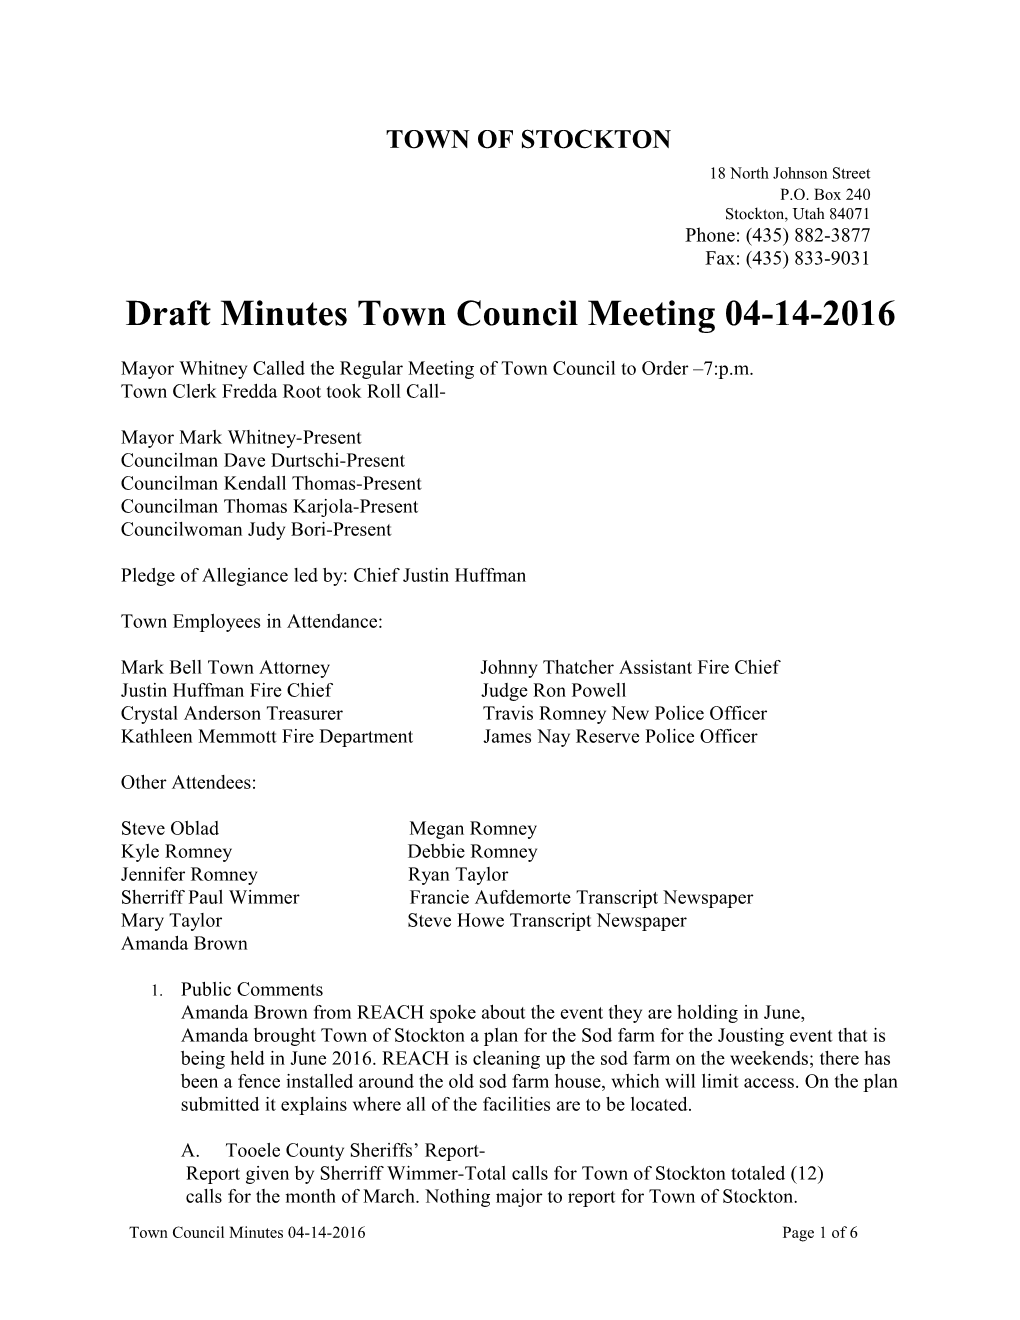 Draft Minutes Town Council Meeting 04-14-2016